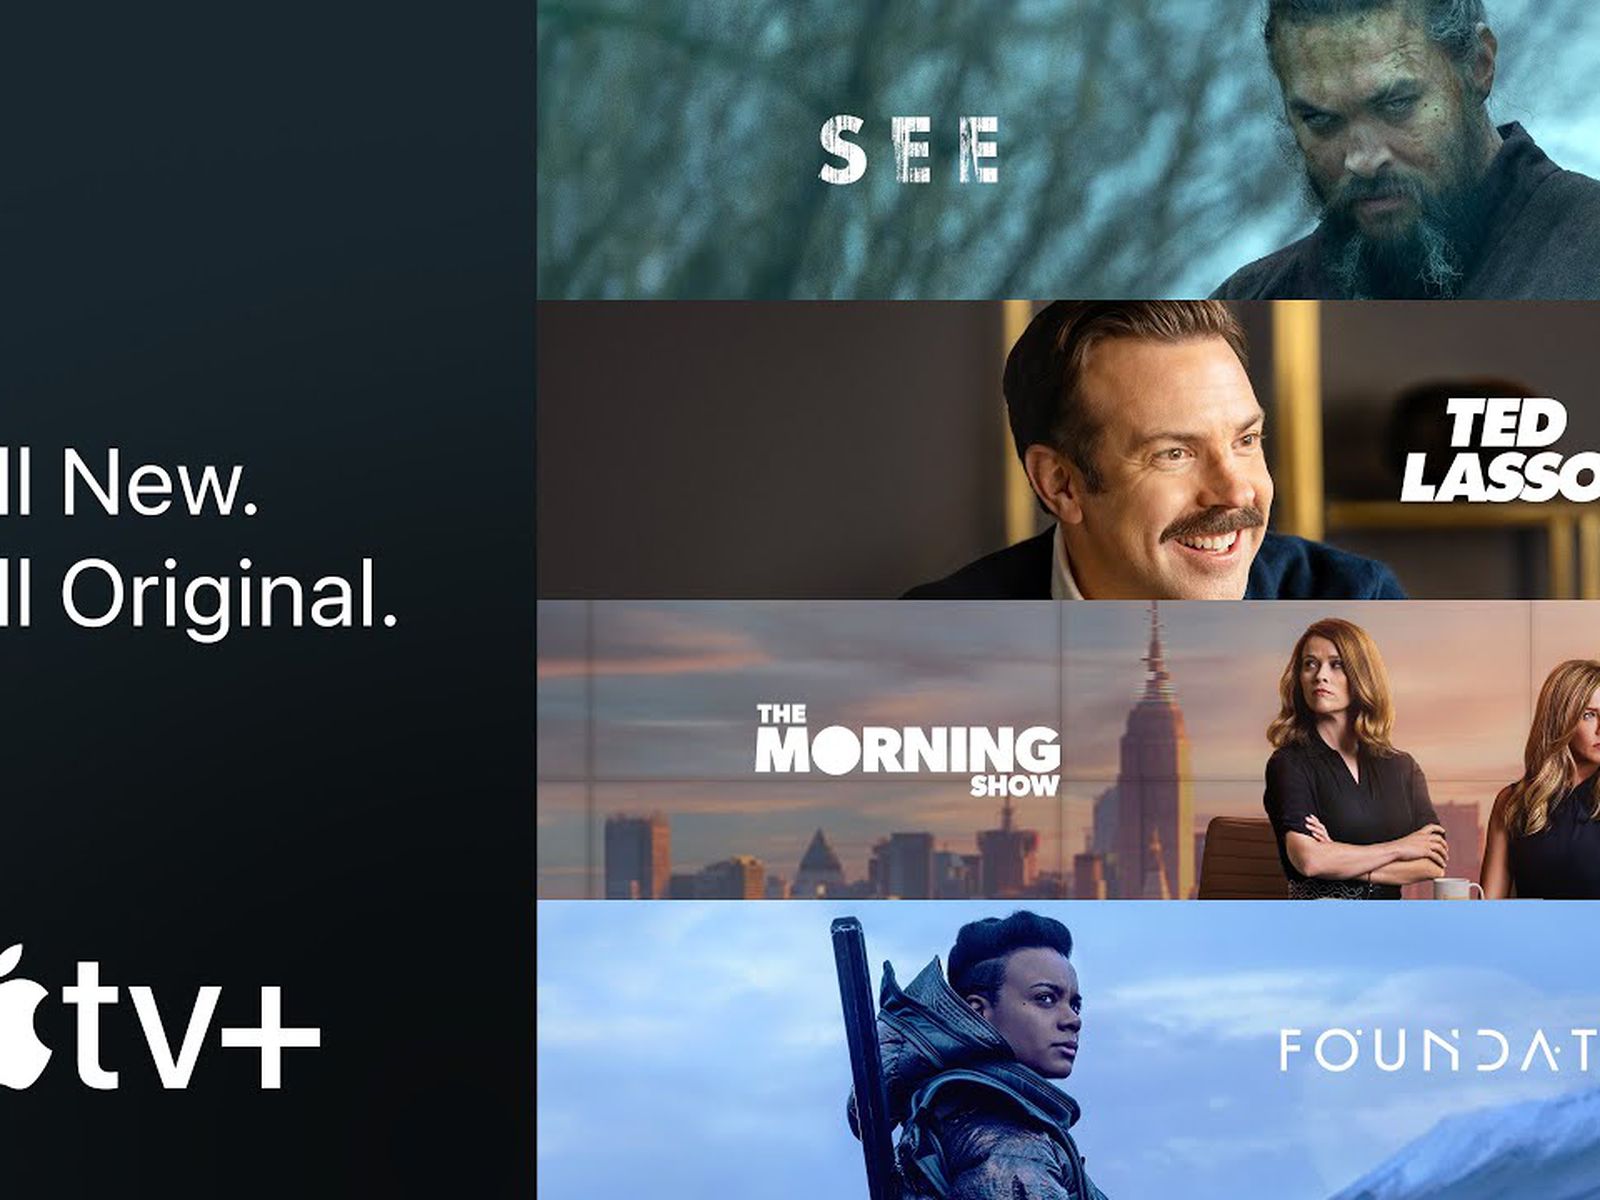 Apple TV+ Shows Coming in Summer 2021 and Beyond, Including Second Season of Ted Lasso - MacRumors